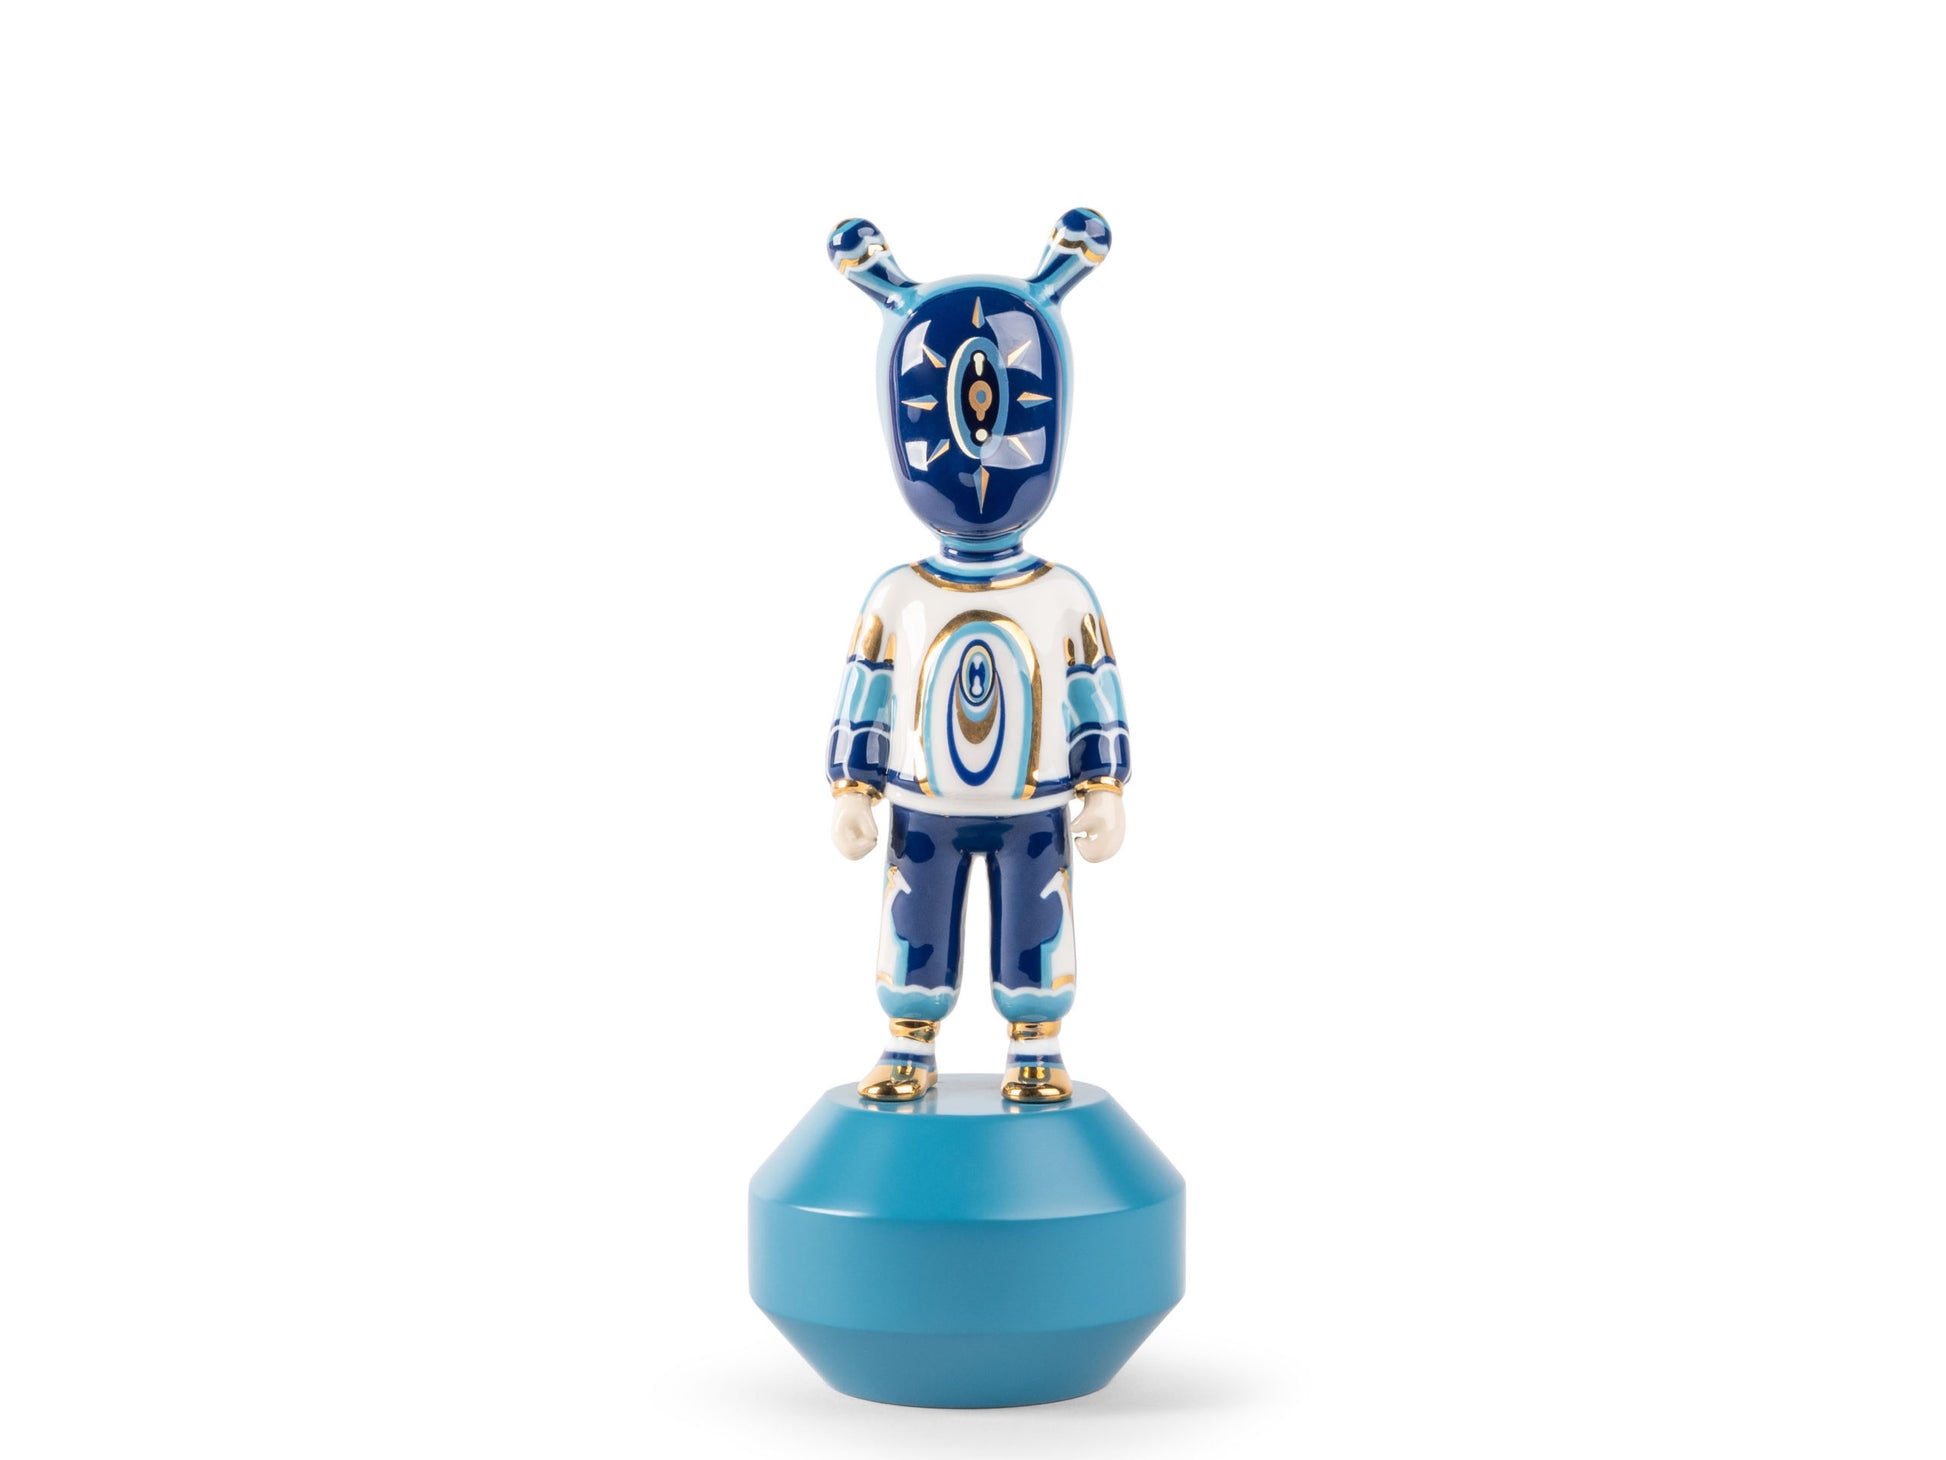 A humanoid figure on a rounded base, decorated with abstracted white, blue and gold clothing patterns